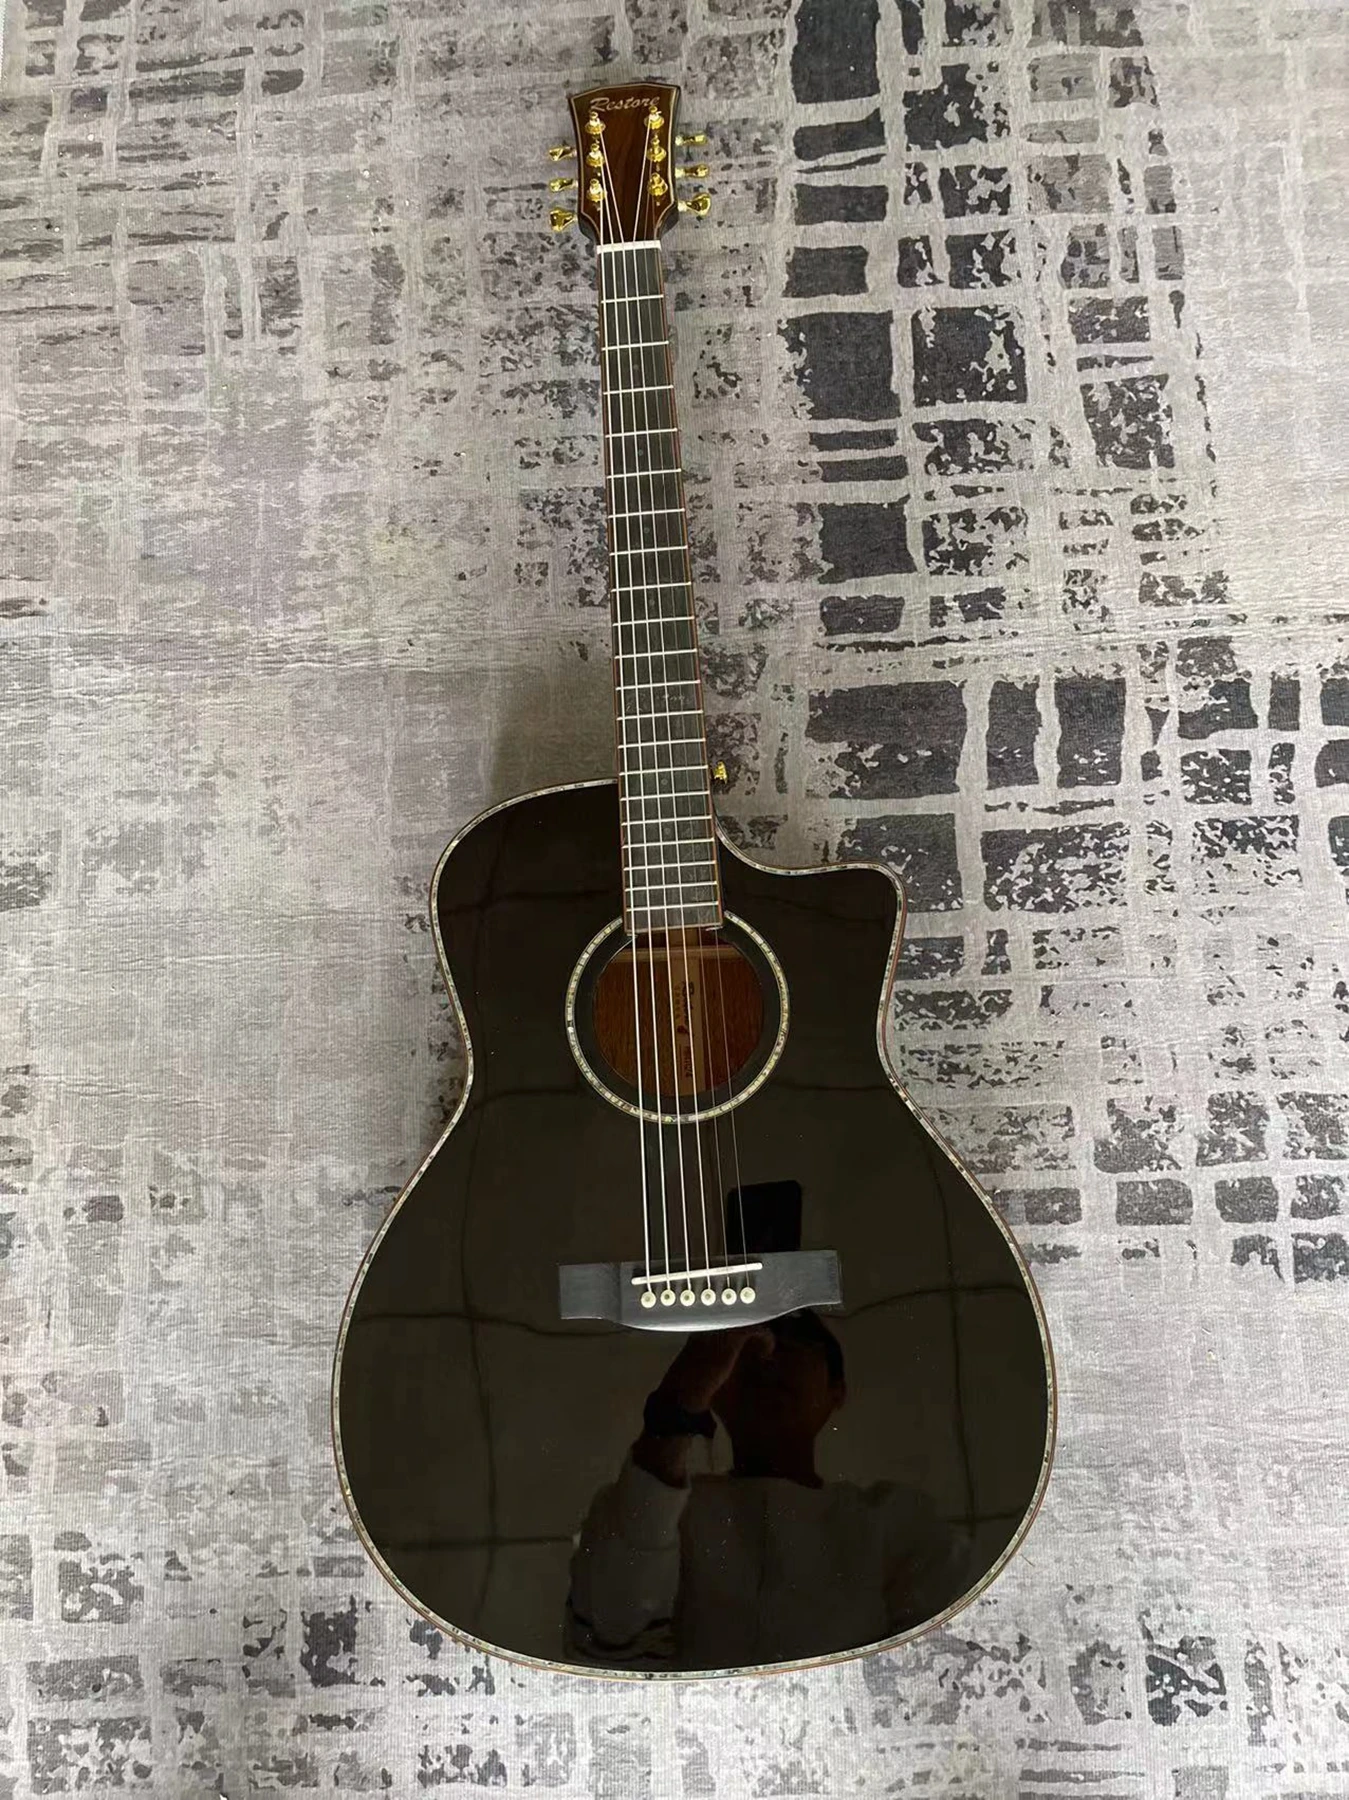 

Full single peach blossom core guitar, travel guitar, rose wood fingerboard, physical shooting, package shipping to home